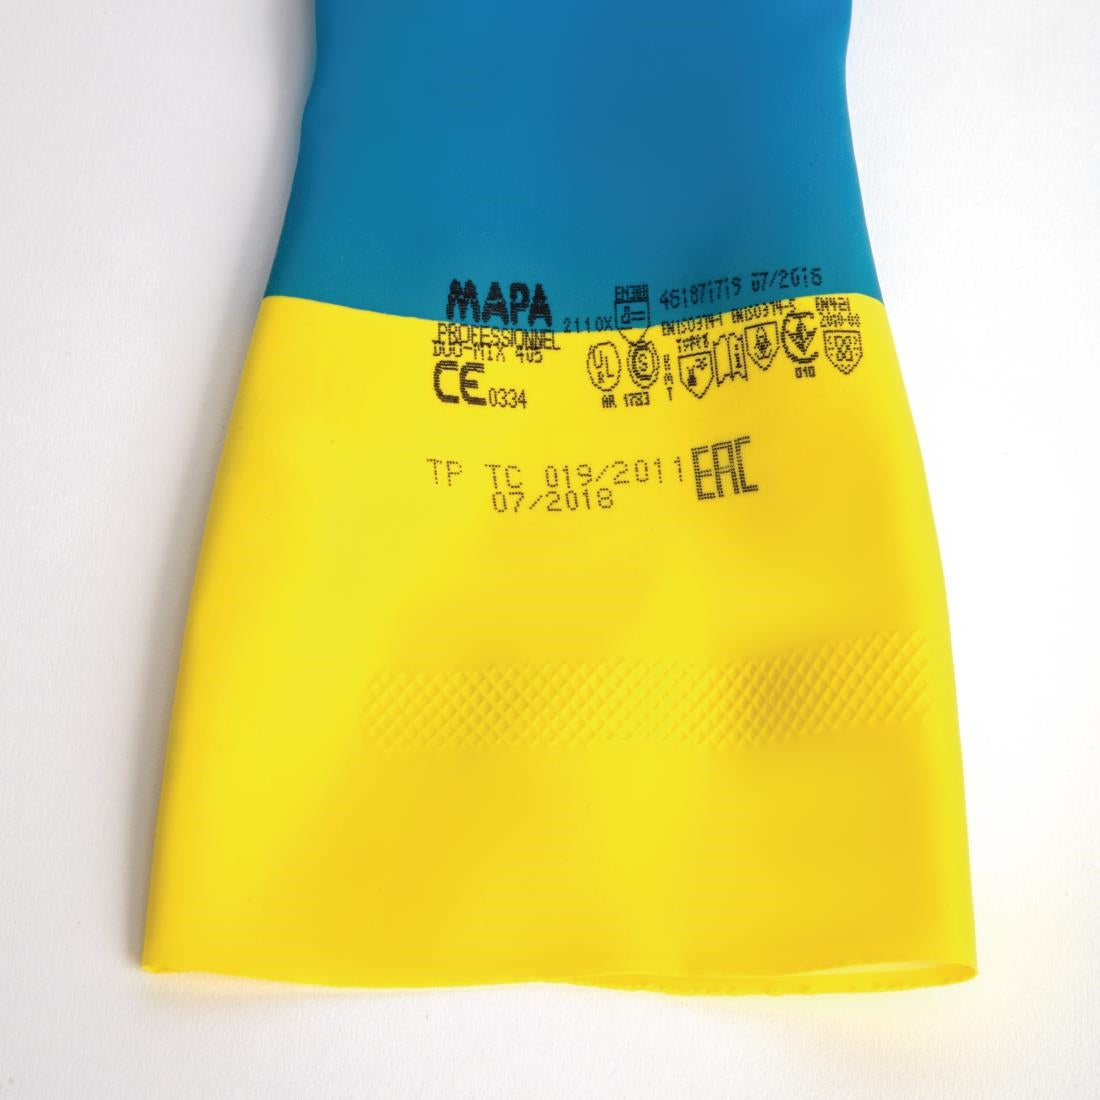 FA296-L MAPA Alto 405 Liquid-Proof Heavy-Duty Janitorial Gloves Blue and Yellow Large